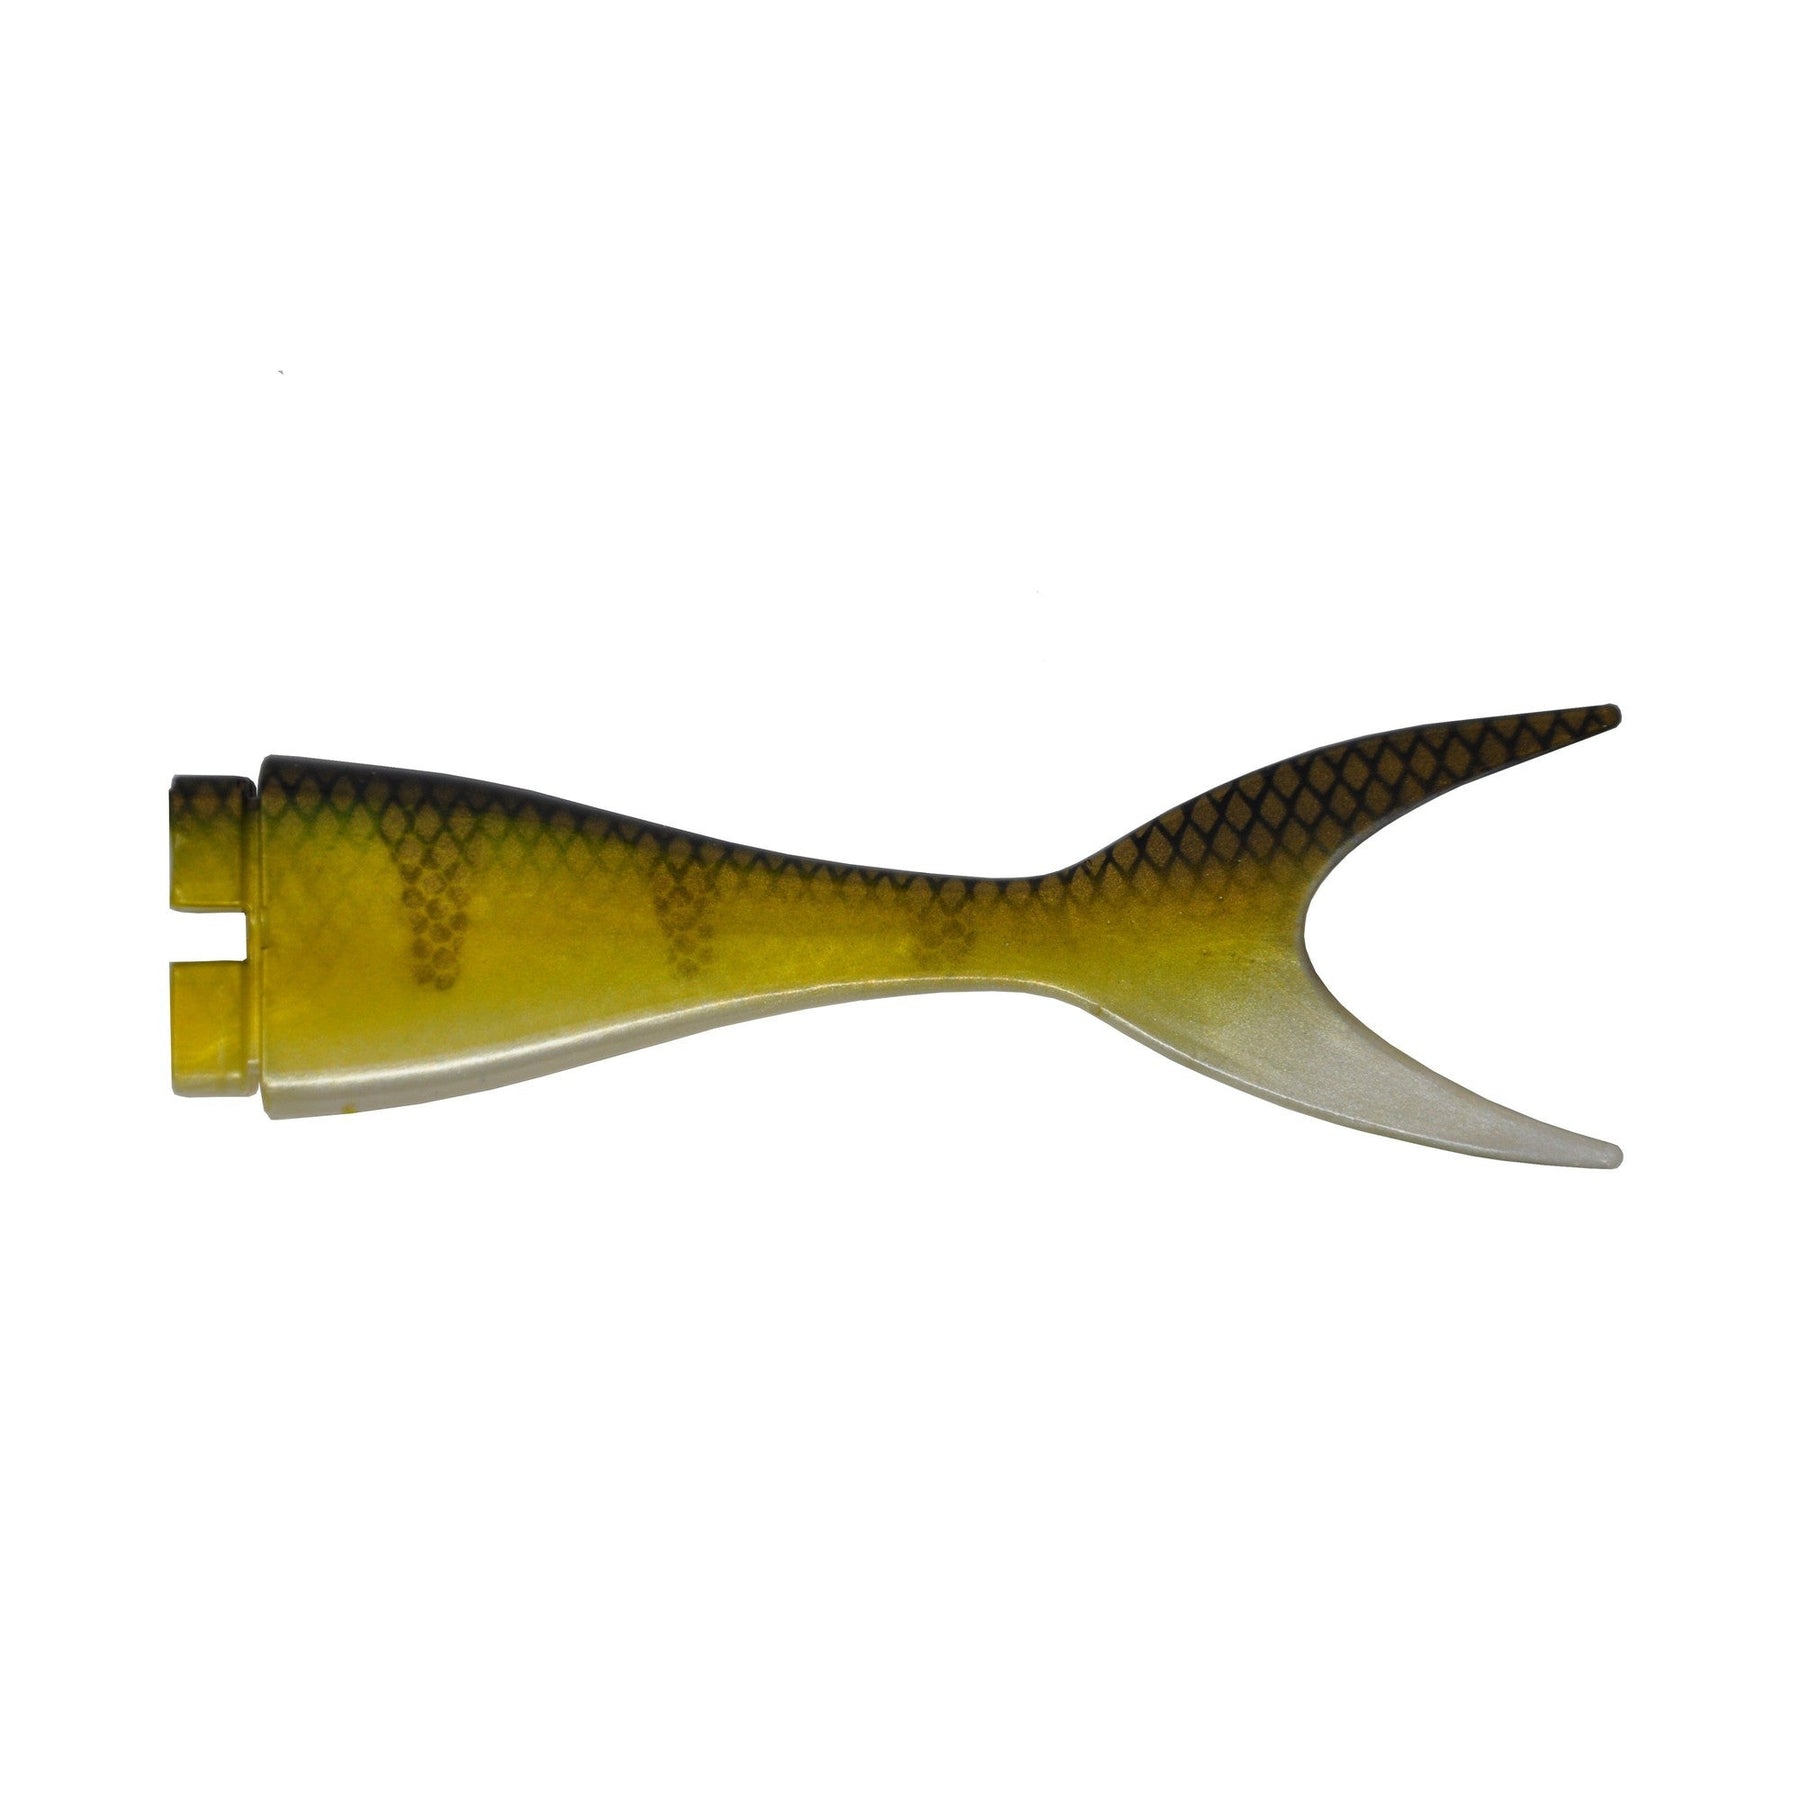 View of Replacement_Tails Musky Innovations Magnum Shallow Invader Replacement Tail UV Naturel Perch available at EZOKO Pike and Musky Shop